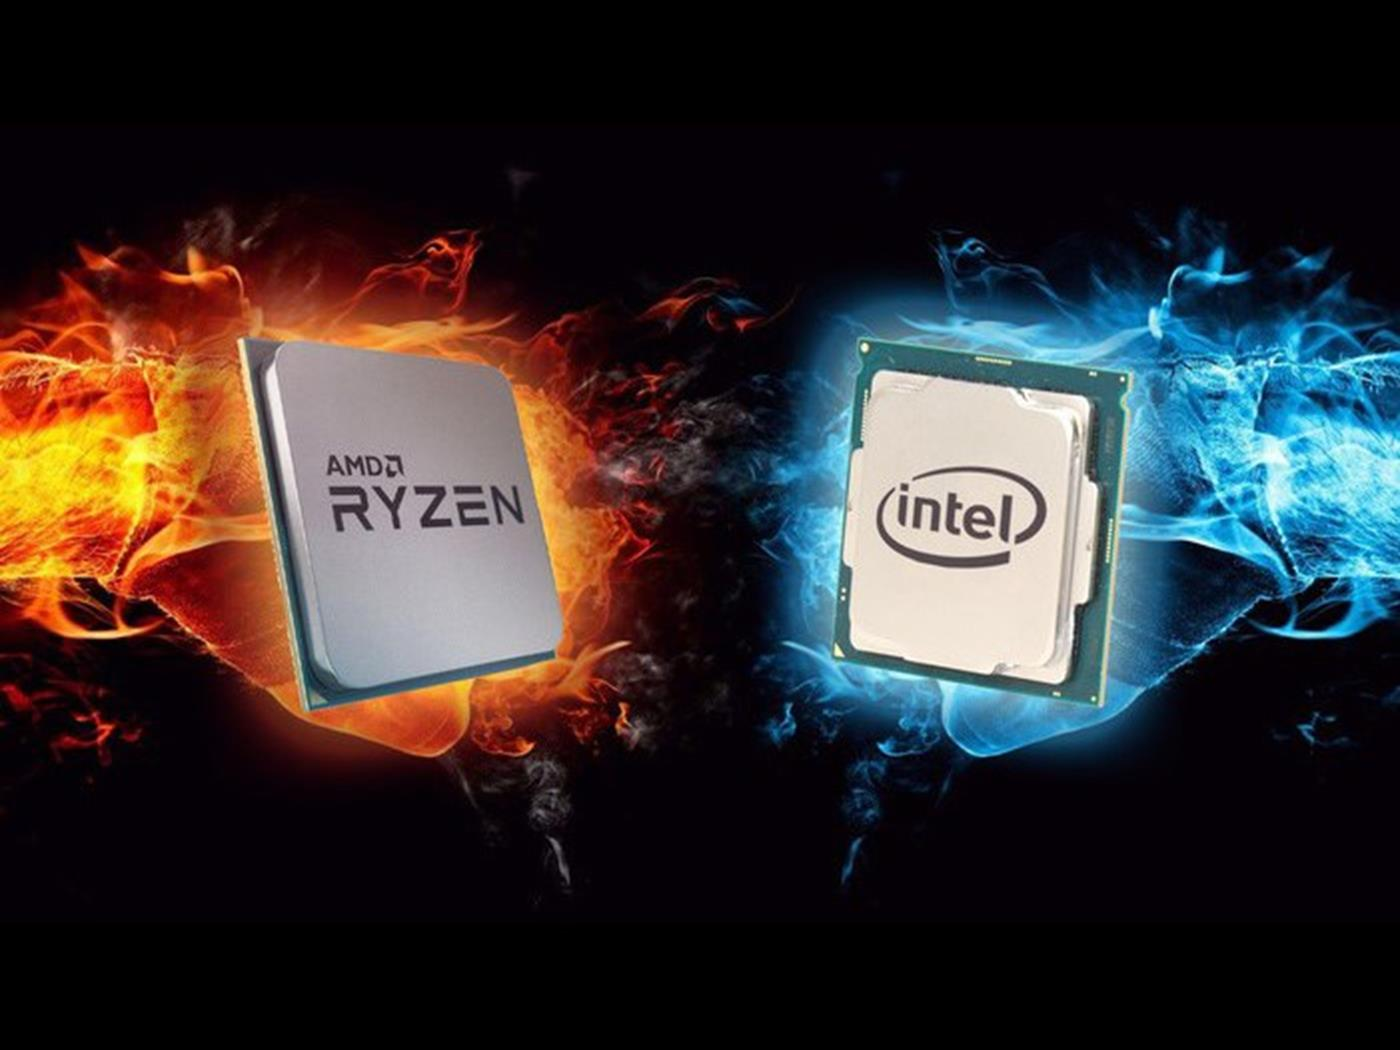 The processor and graphics card brand most preferred by gamers has been announced!